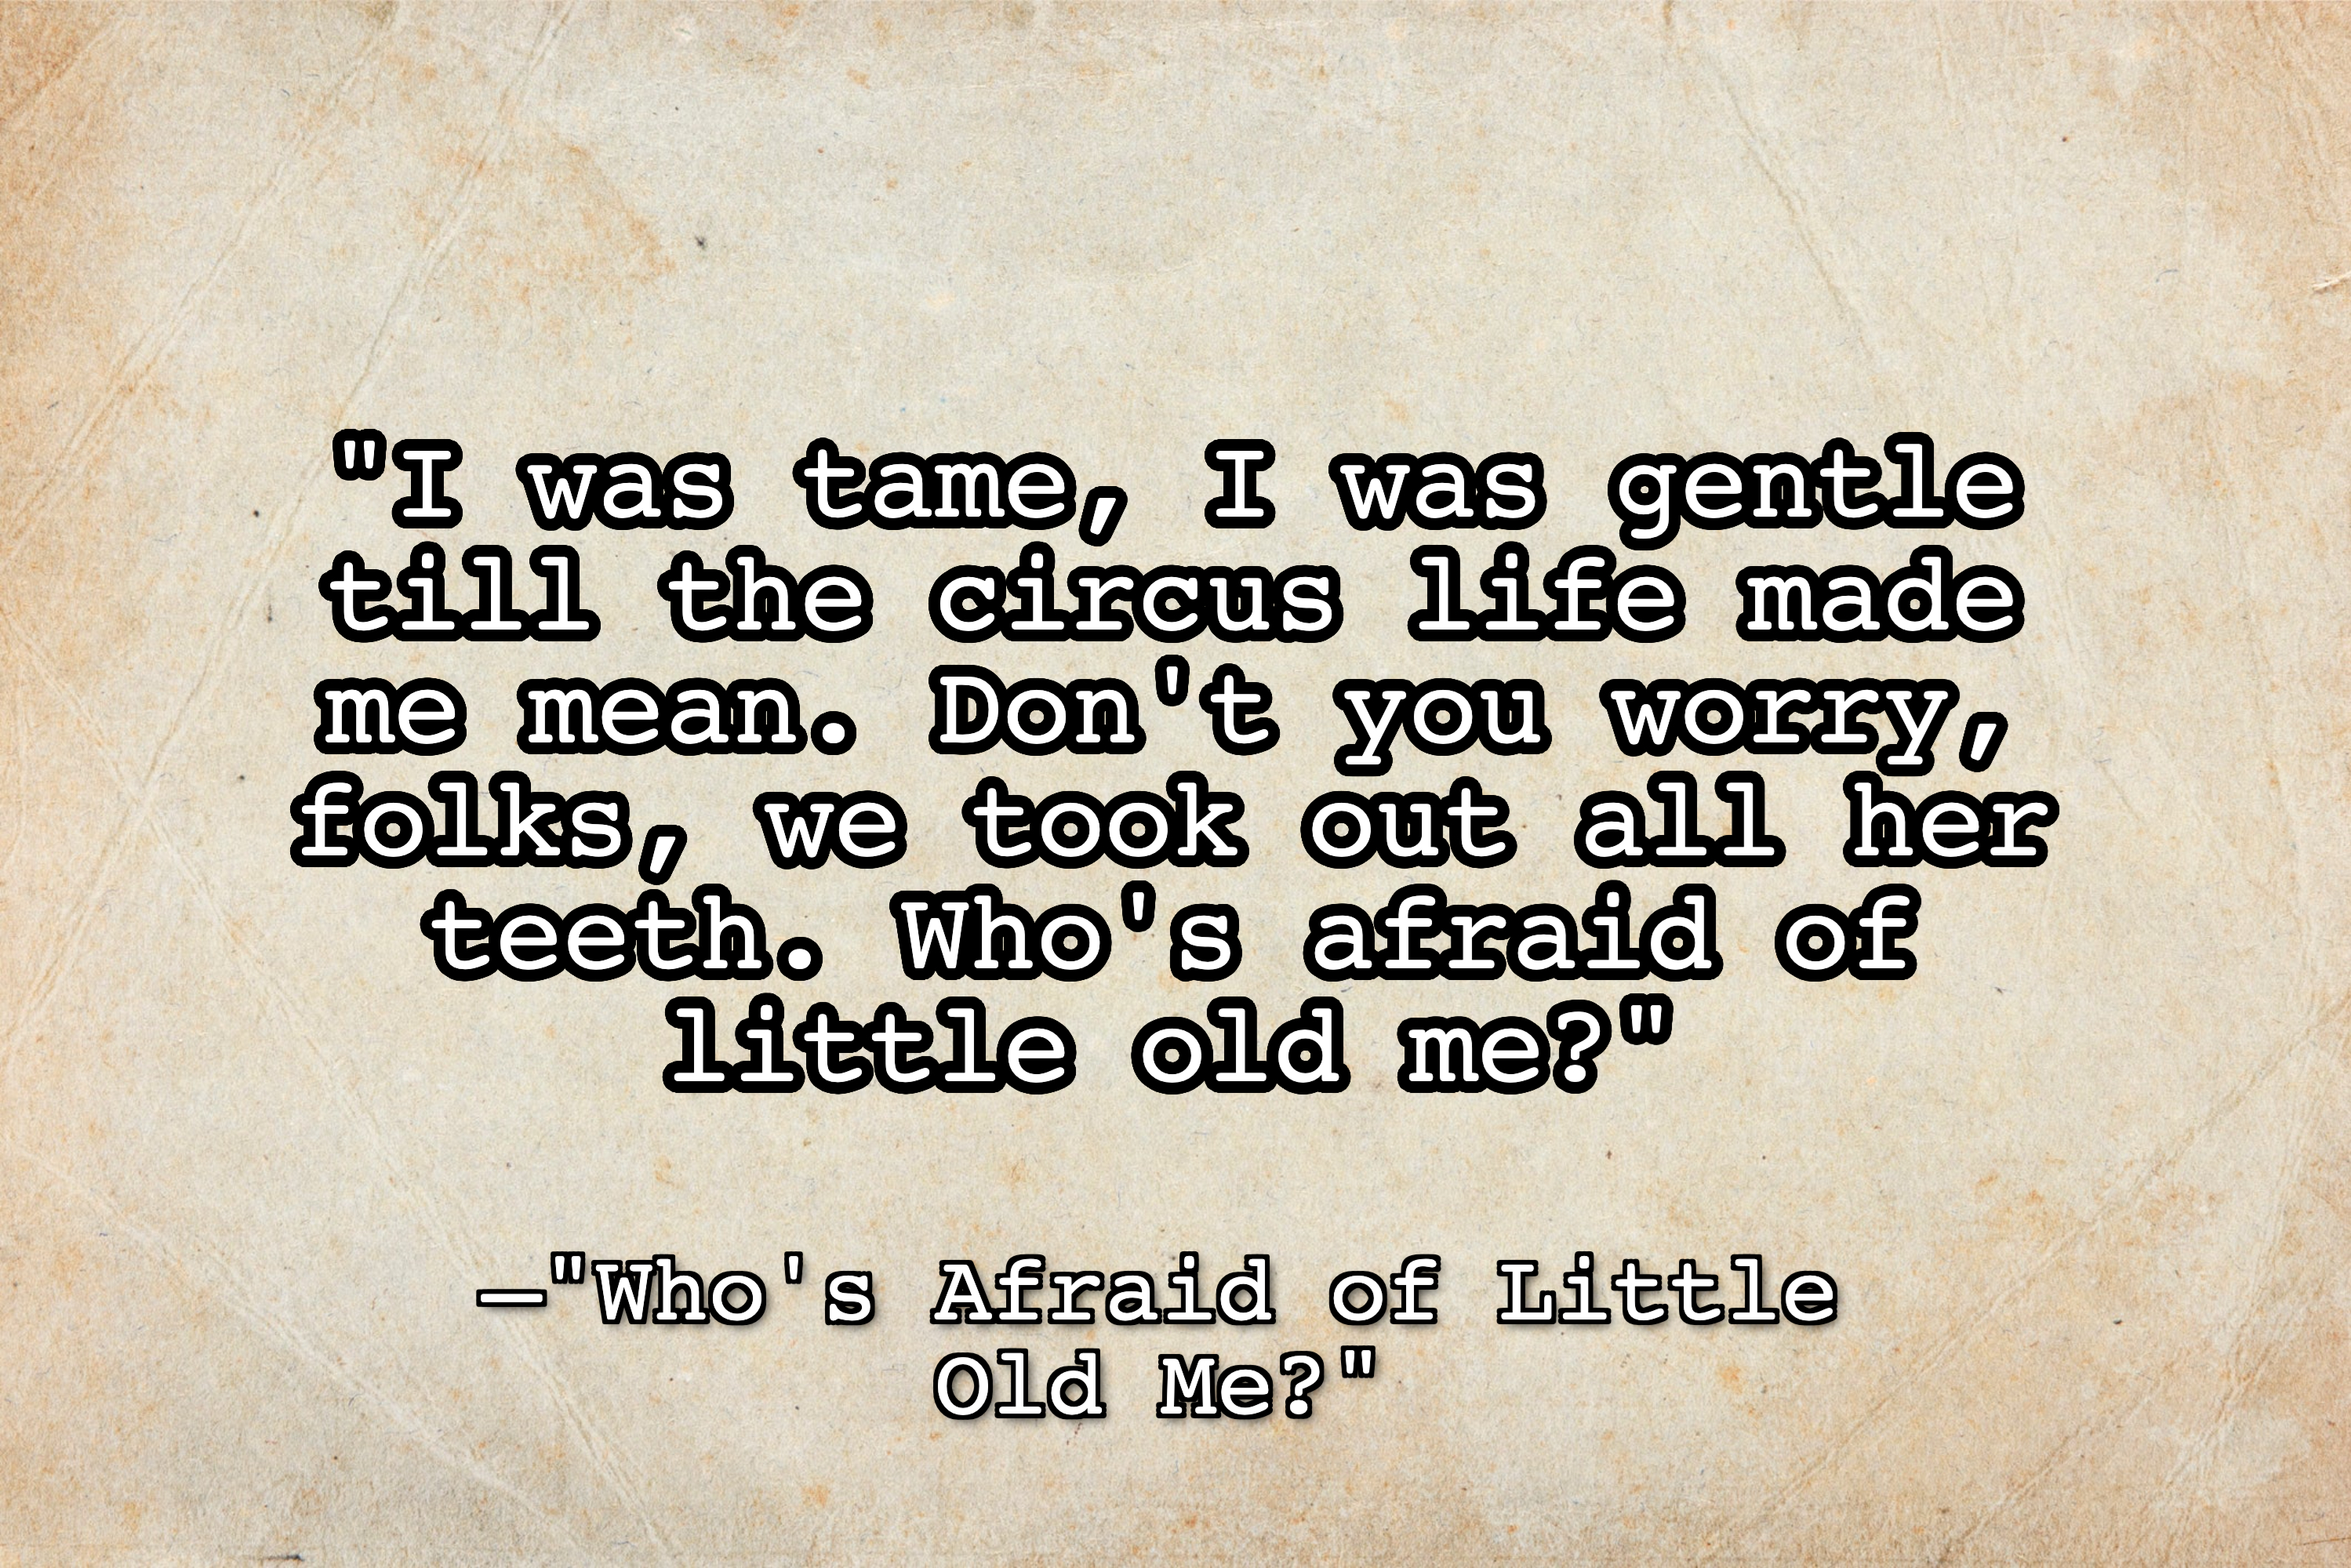 Textured beige paper background with the text, &quot;I was tame, I was gentle till the circus life made me mean. don&#x27;t you worry, folks, we took out all her teeth. who&#x27;s afraid of little old me?&quot;